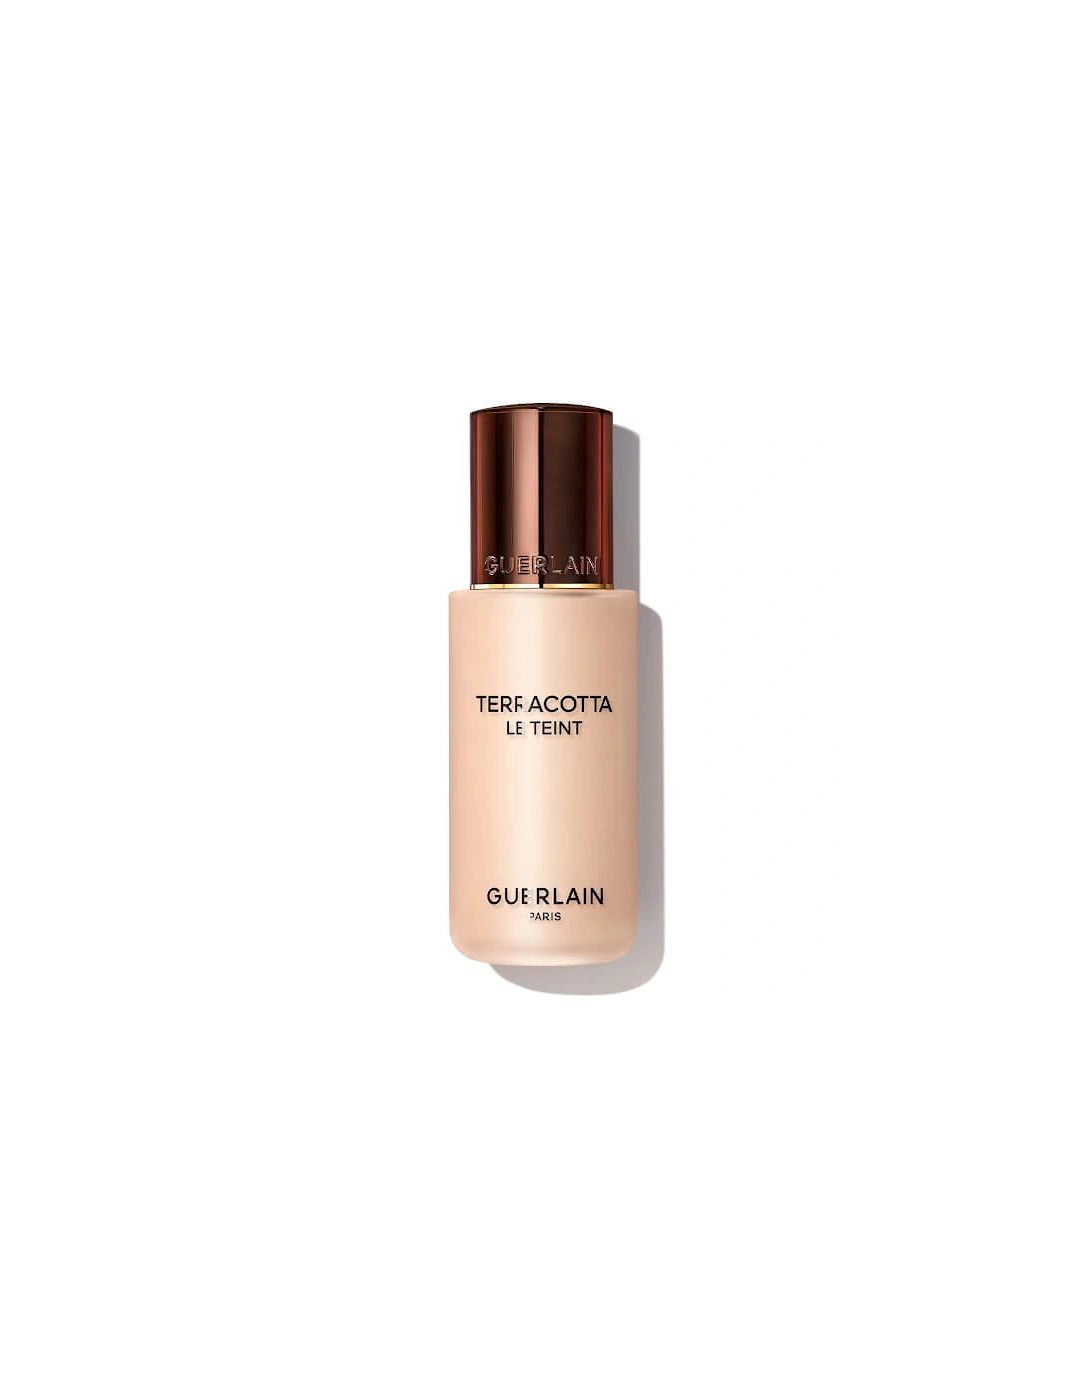 Terracotta Le Teint Healthy Glow Natural Perfection Foundation - 1C, 2 of 1